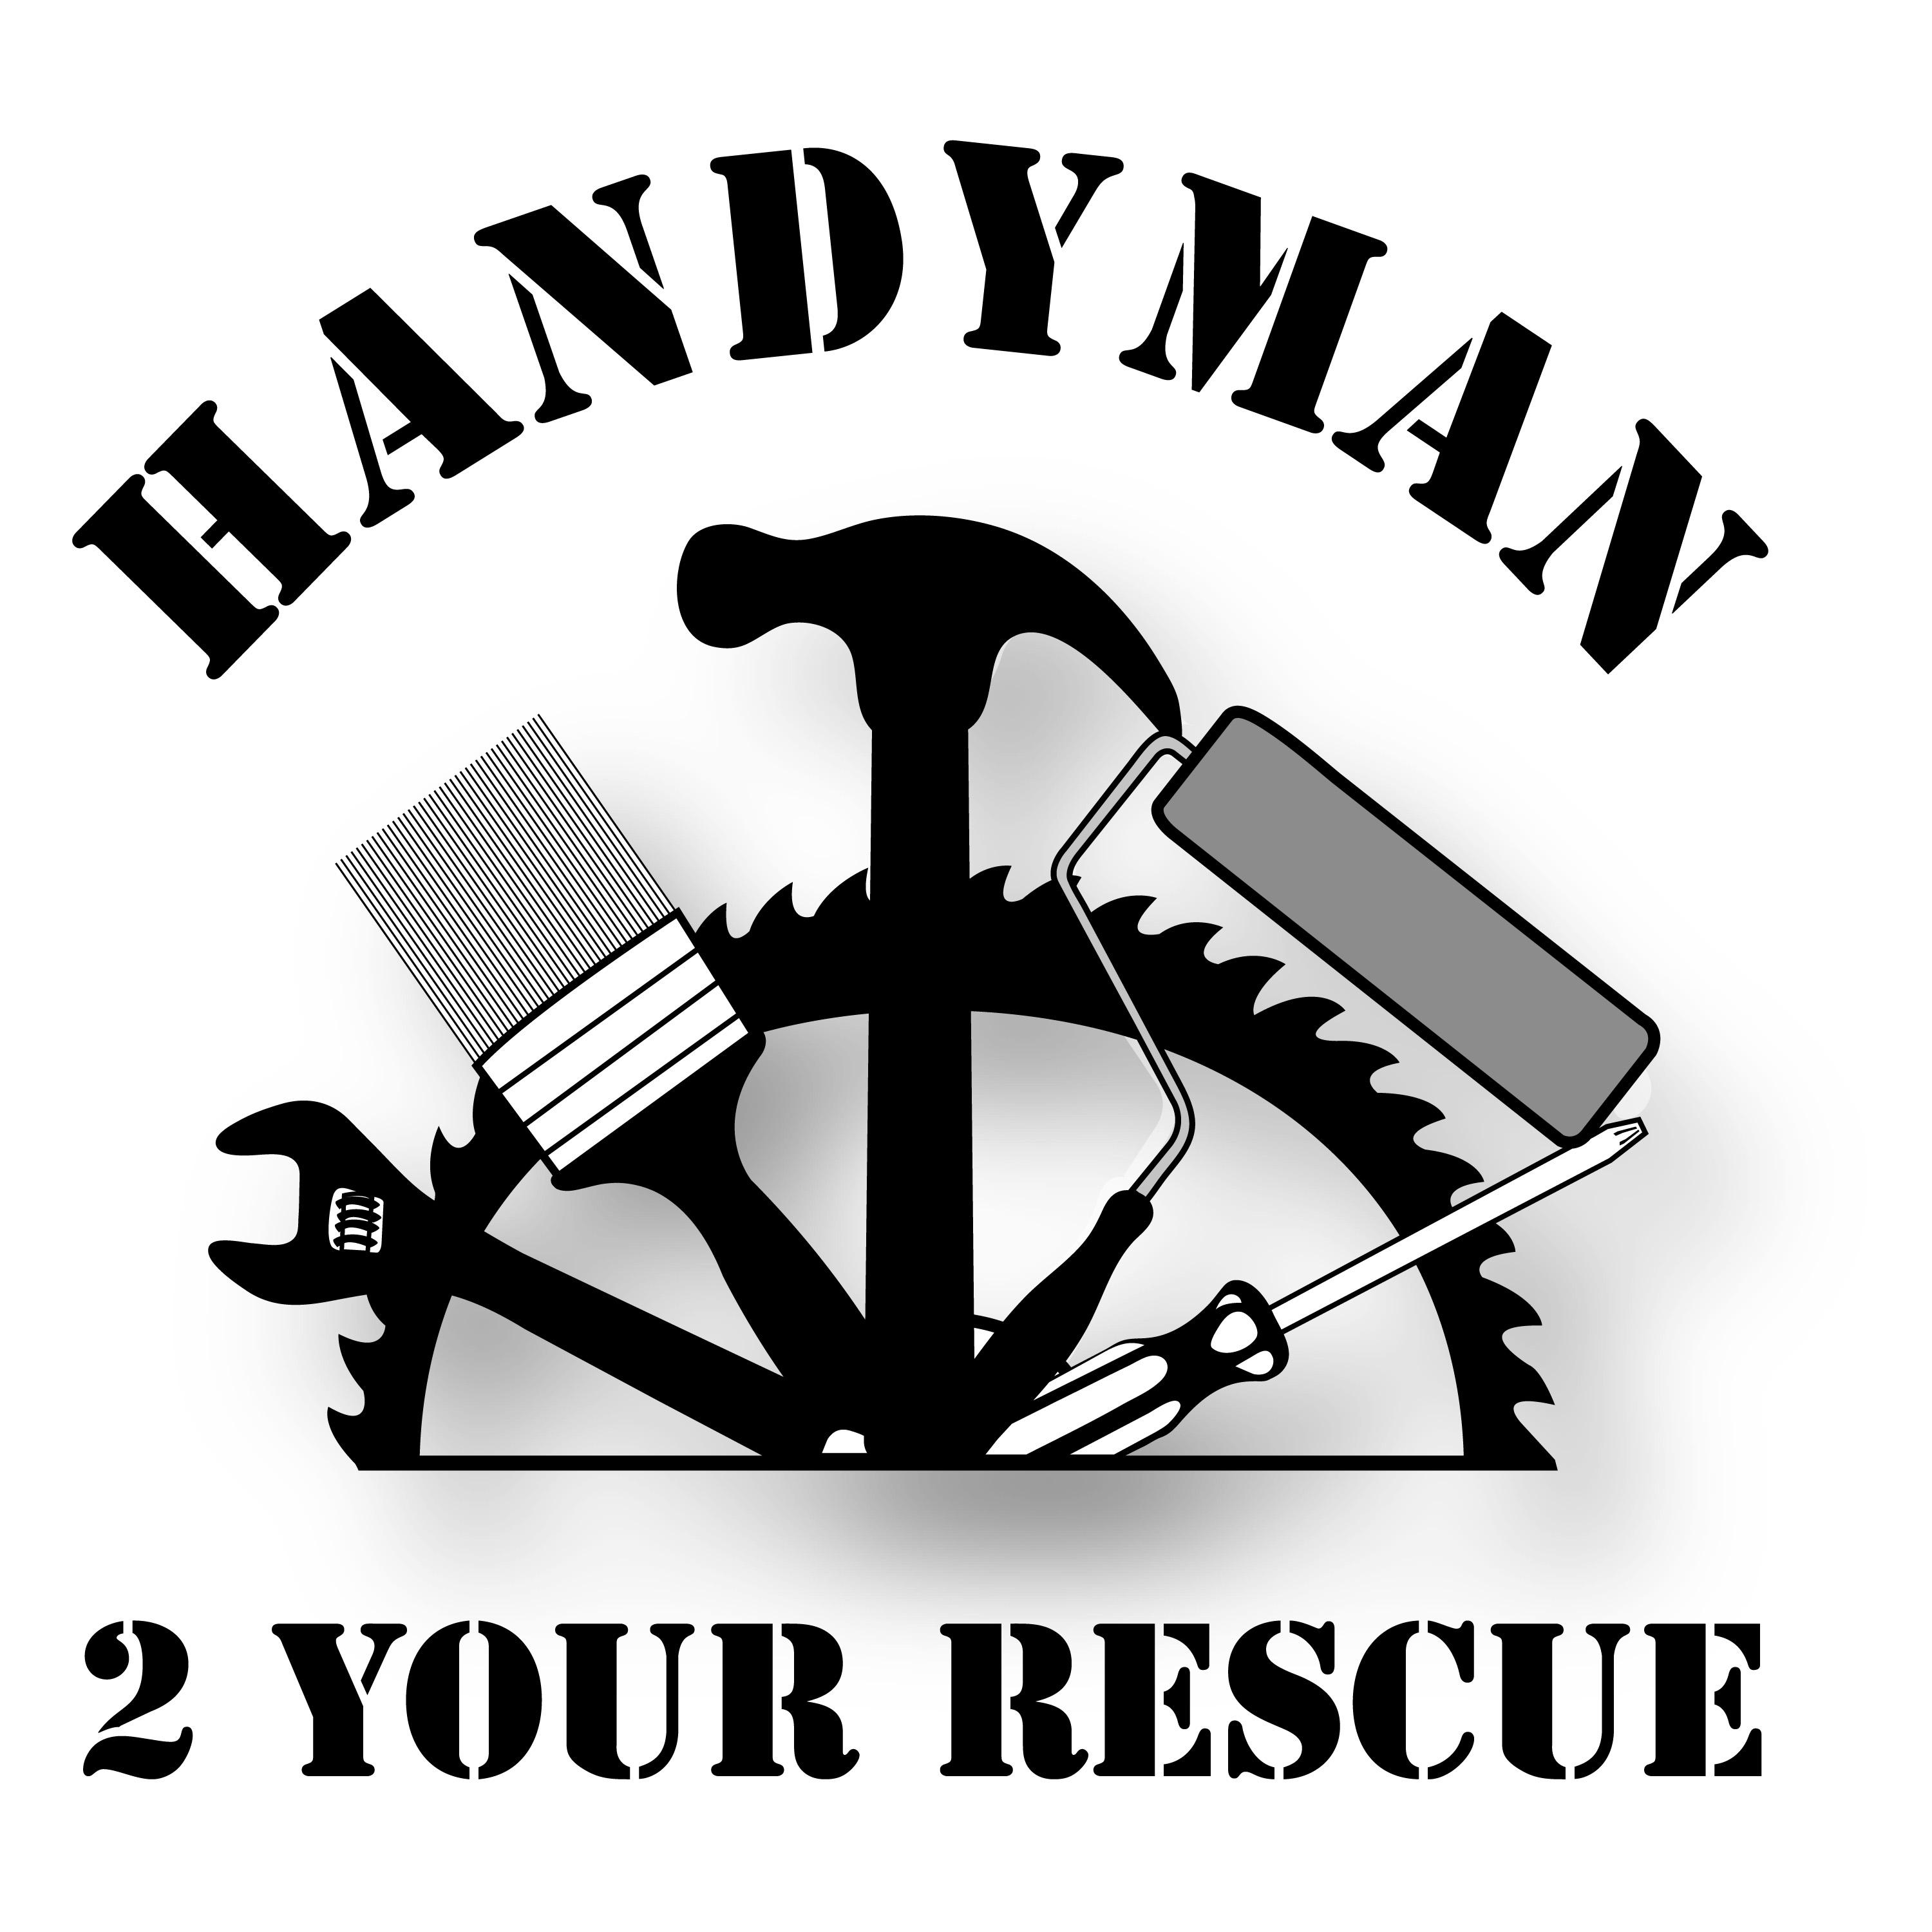 Home « Handyman 2 Your Rescue ...